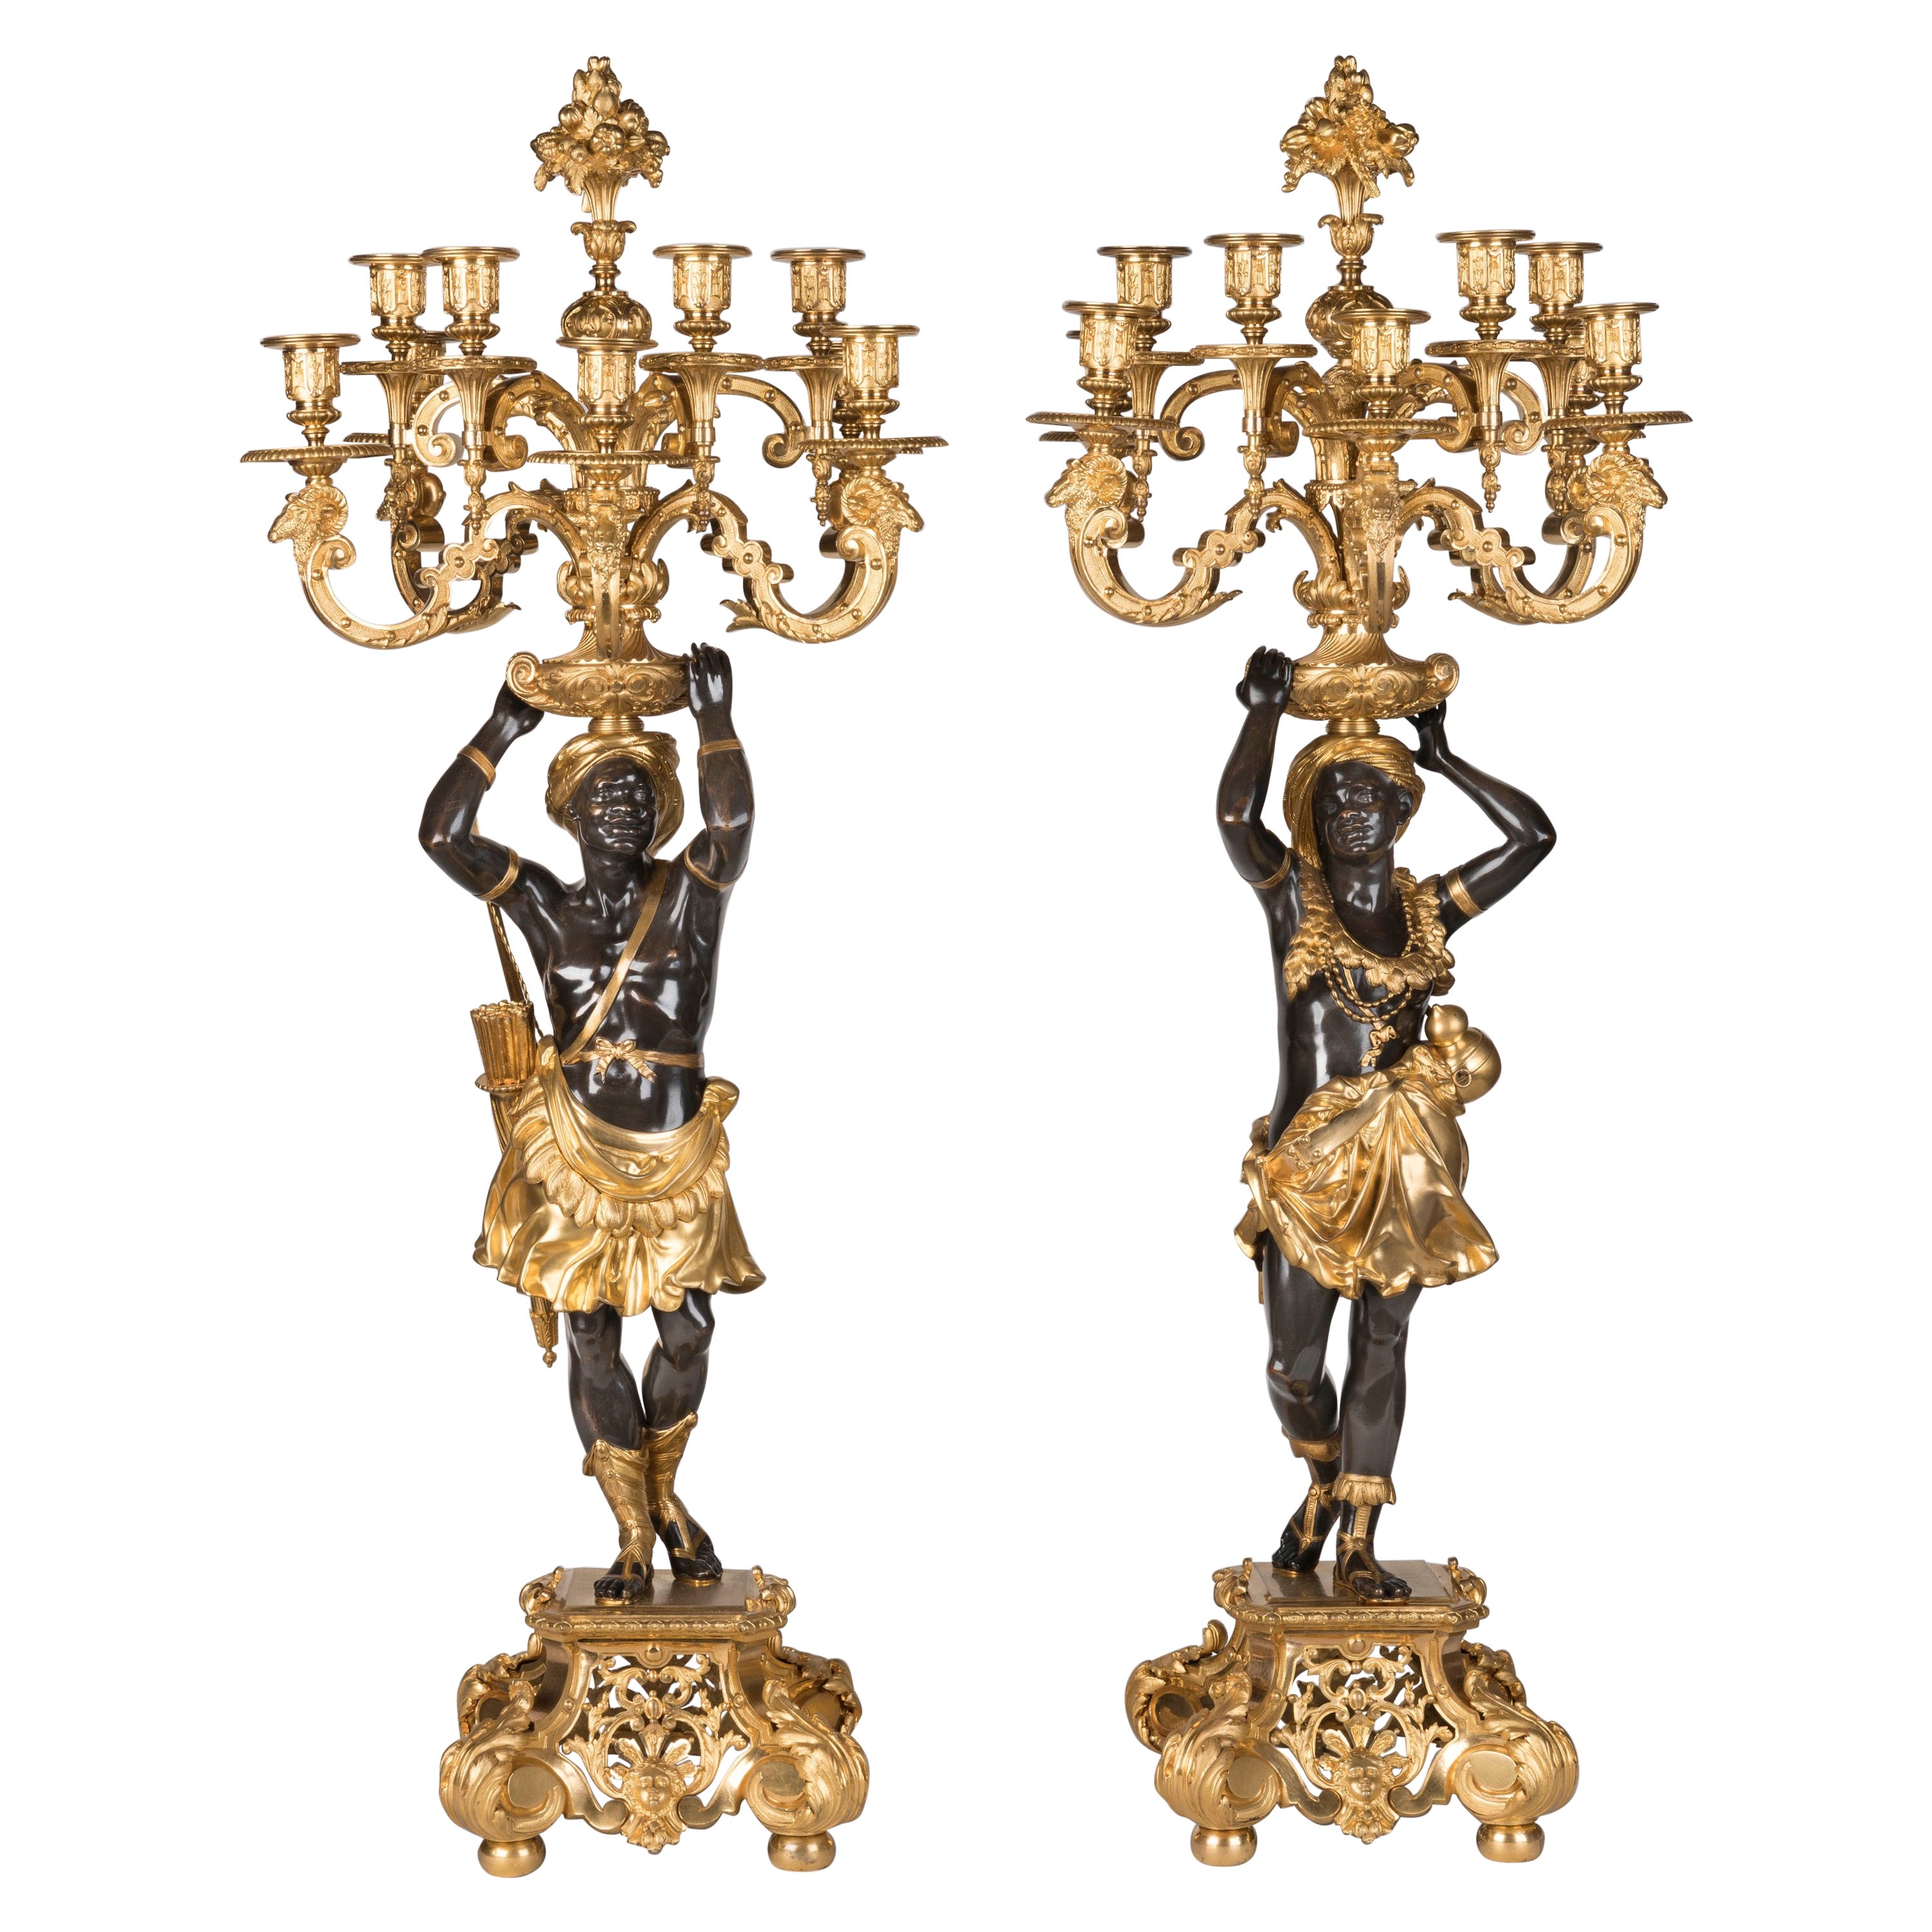 Pair of Large 19th Century Bronze and Gilded Figural Candelabra by Denière